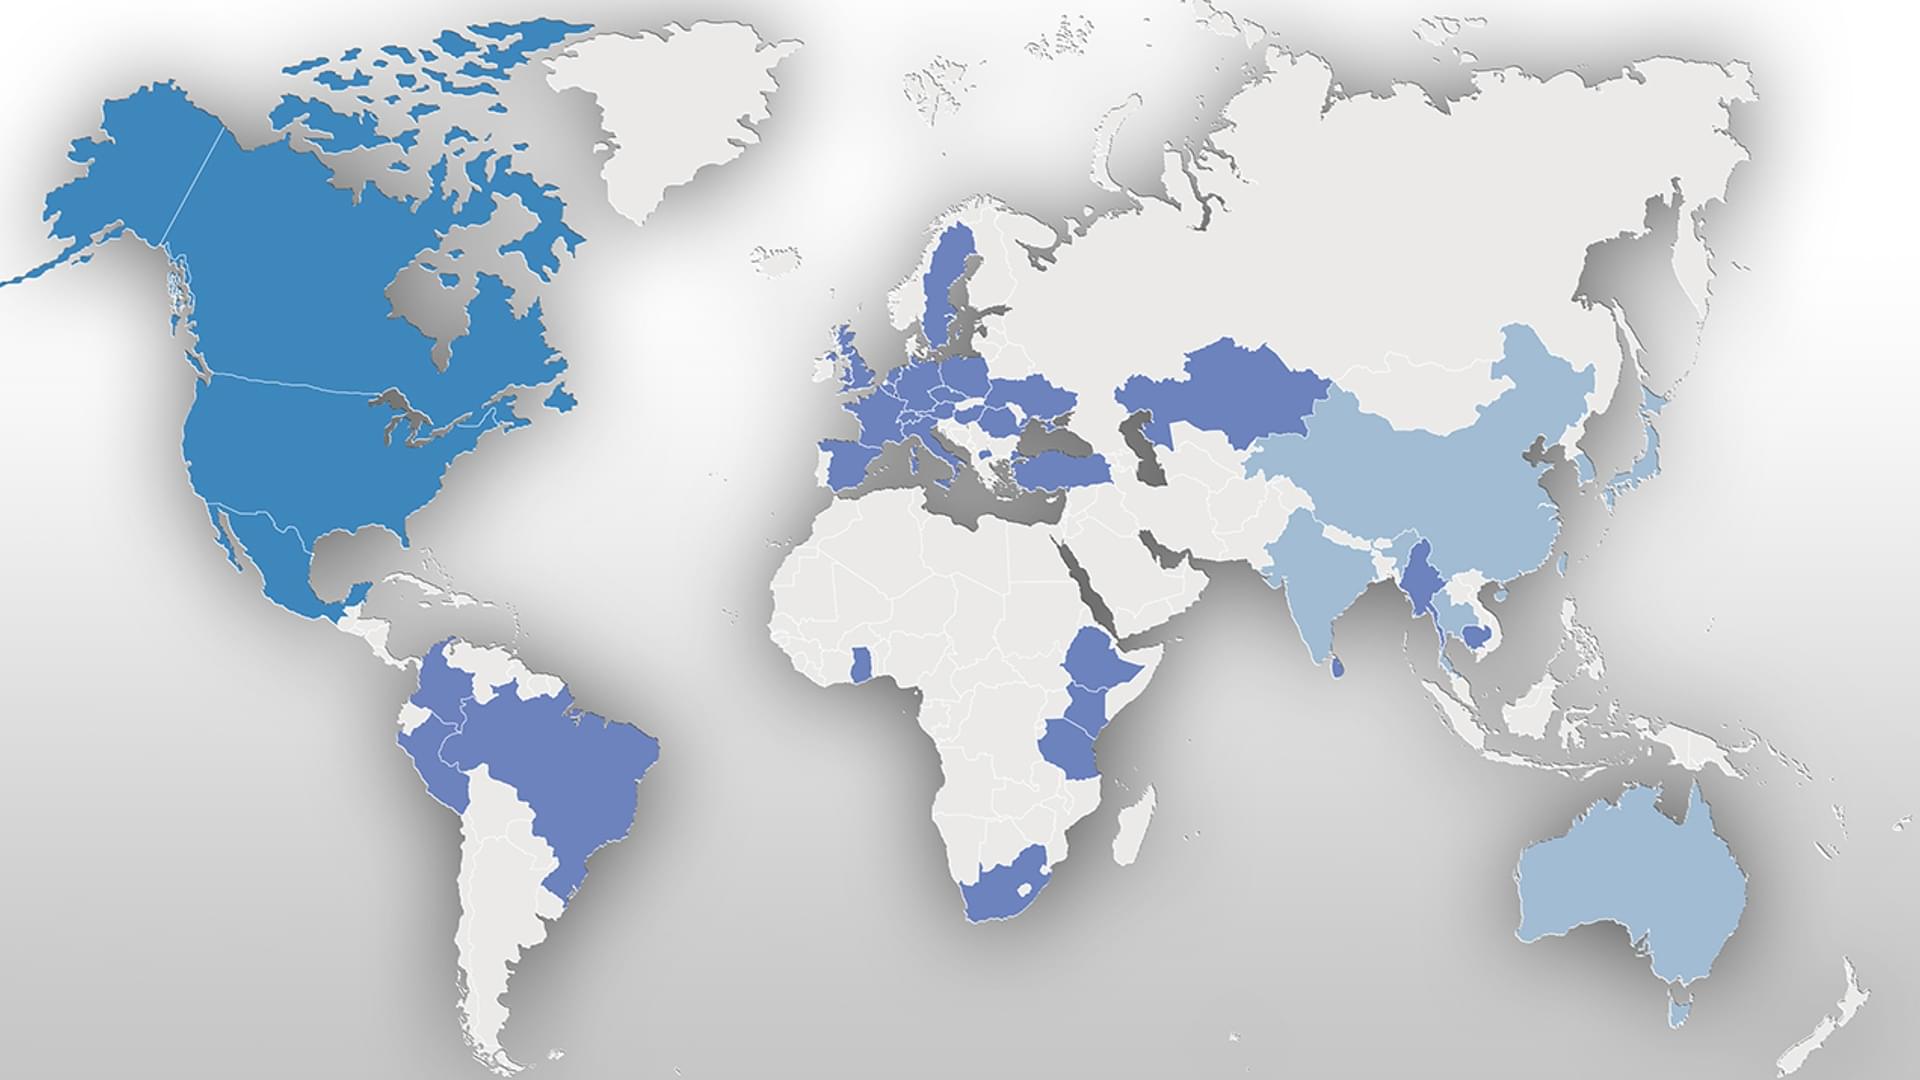 World Map with Knorr-Bremse Global Care regions and projects countries